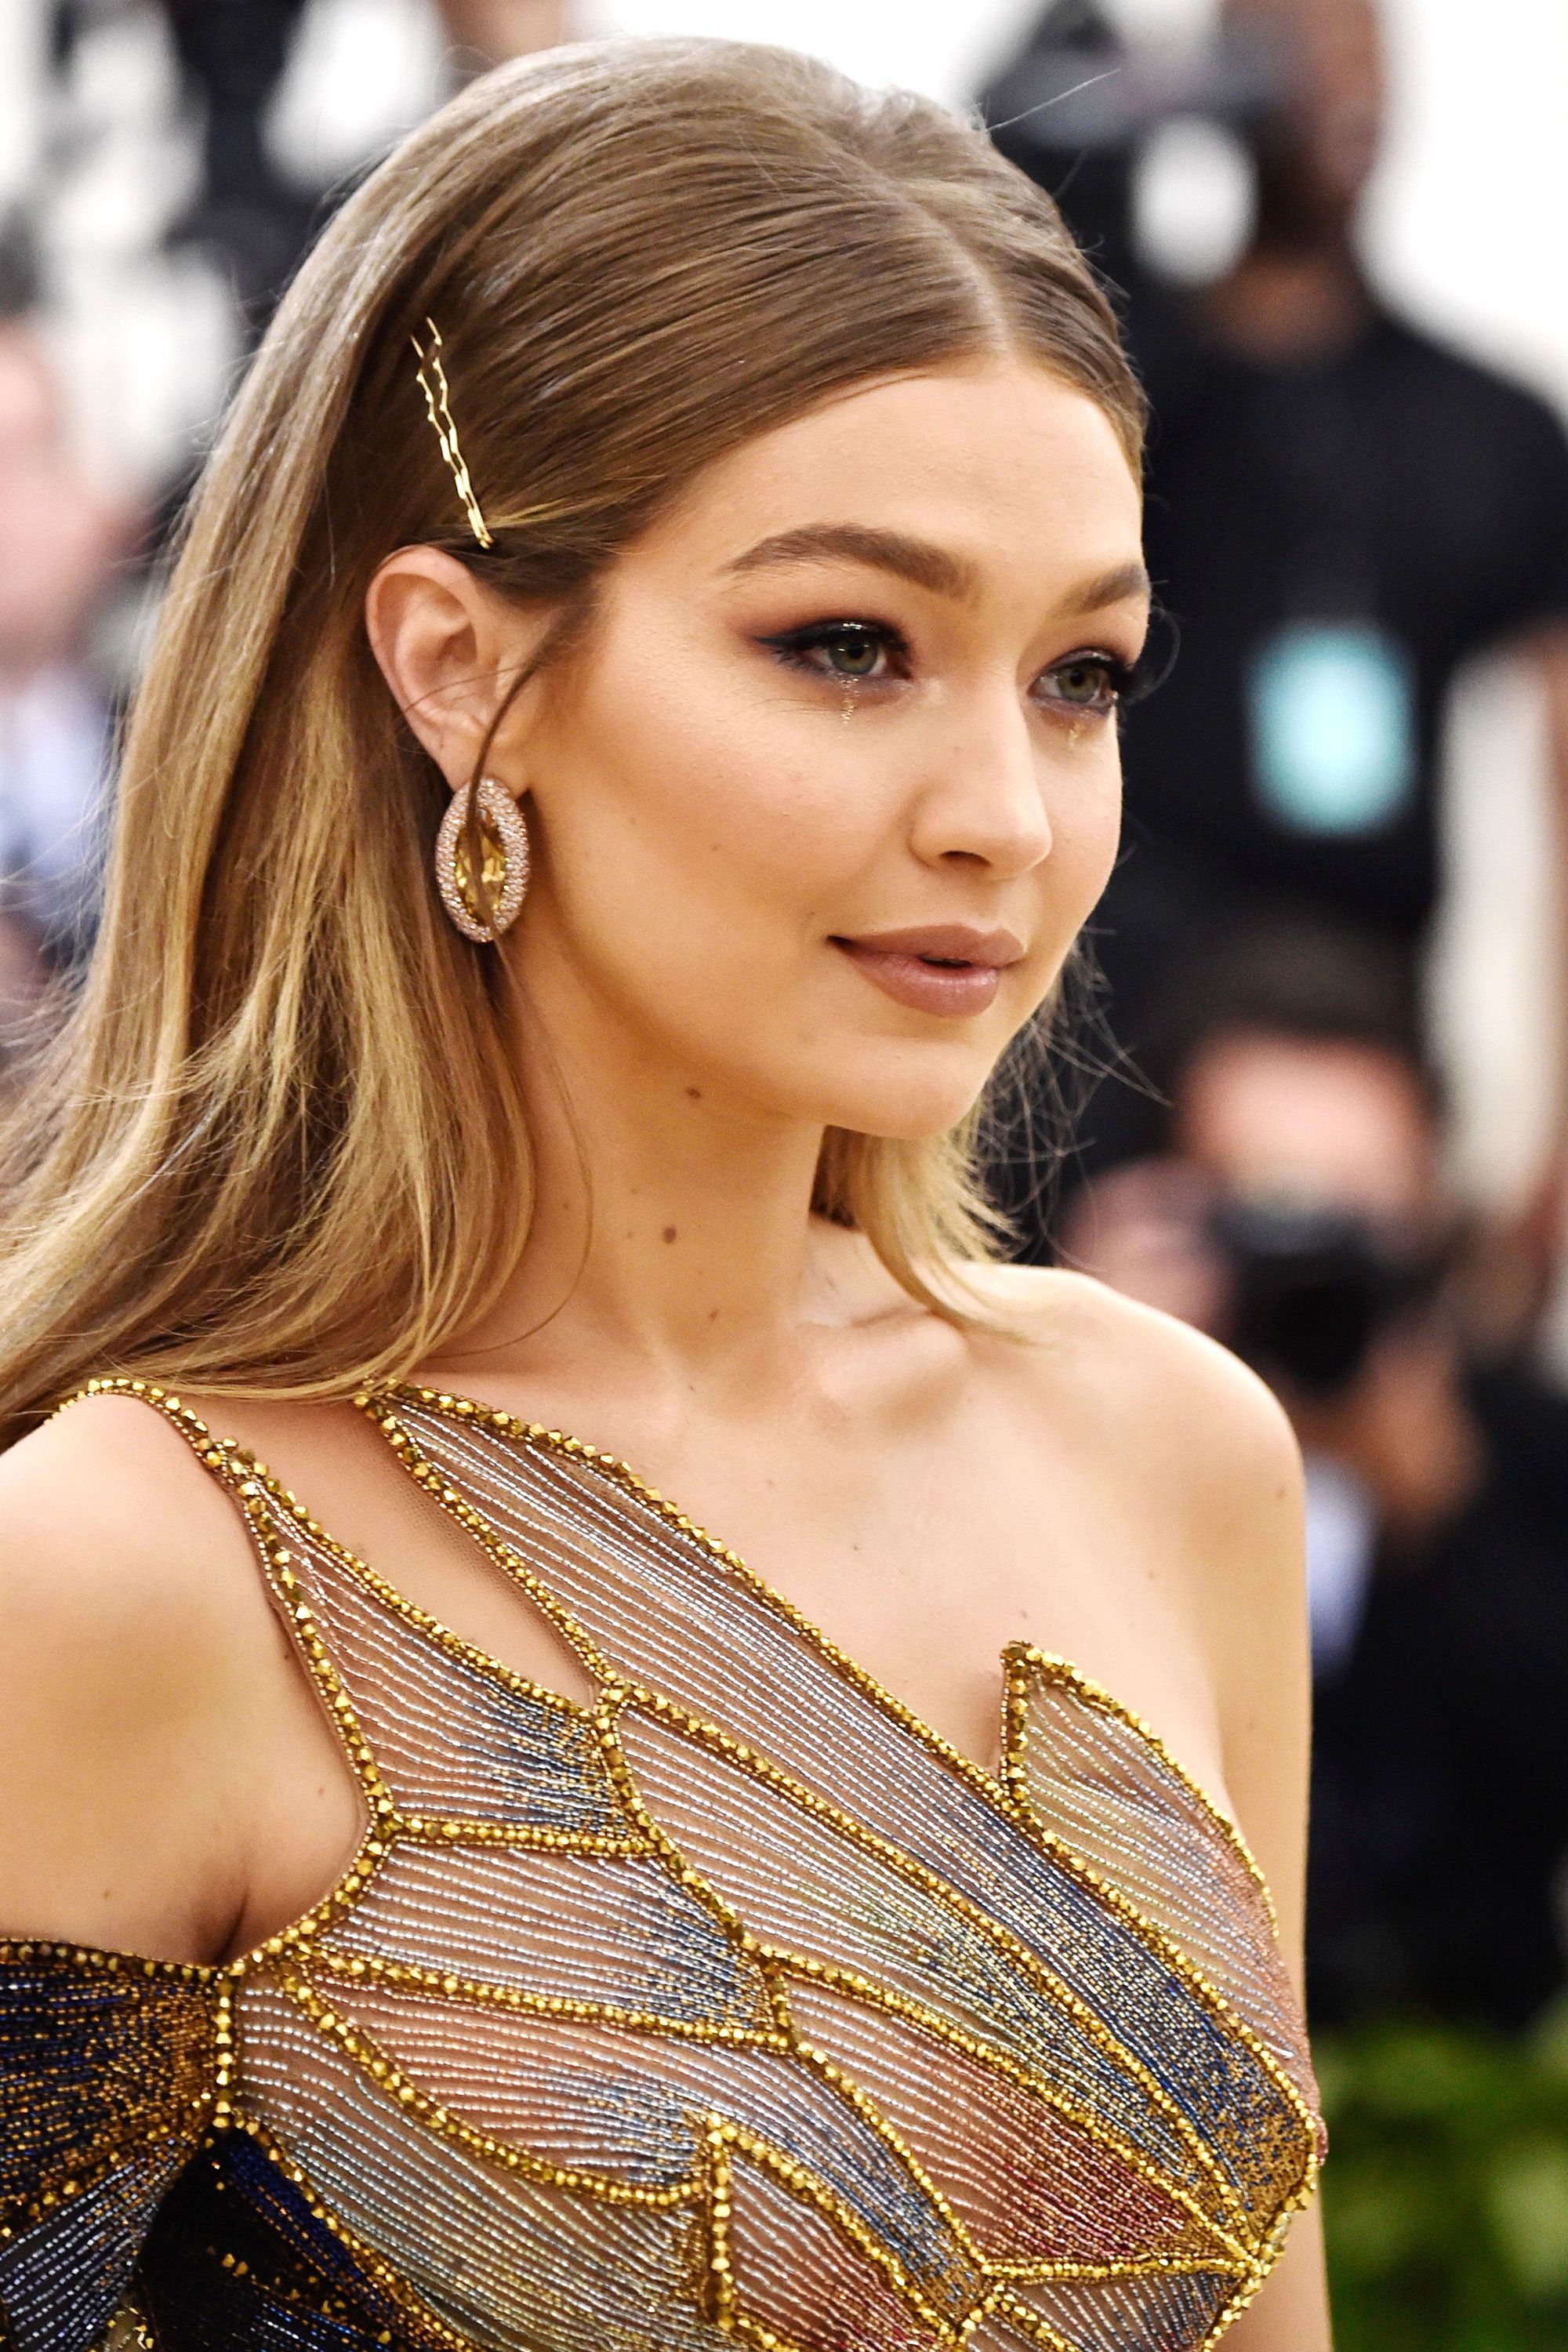 The Tiaras and Pendant Earrings at the Met Gala